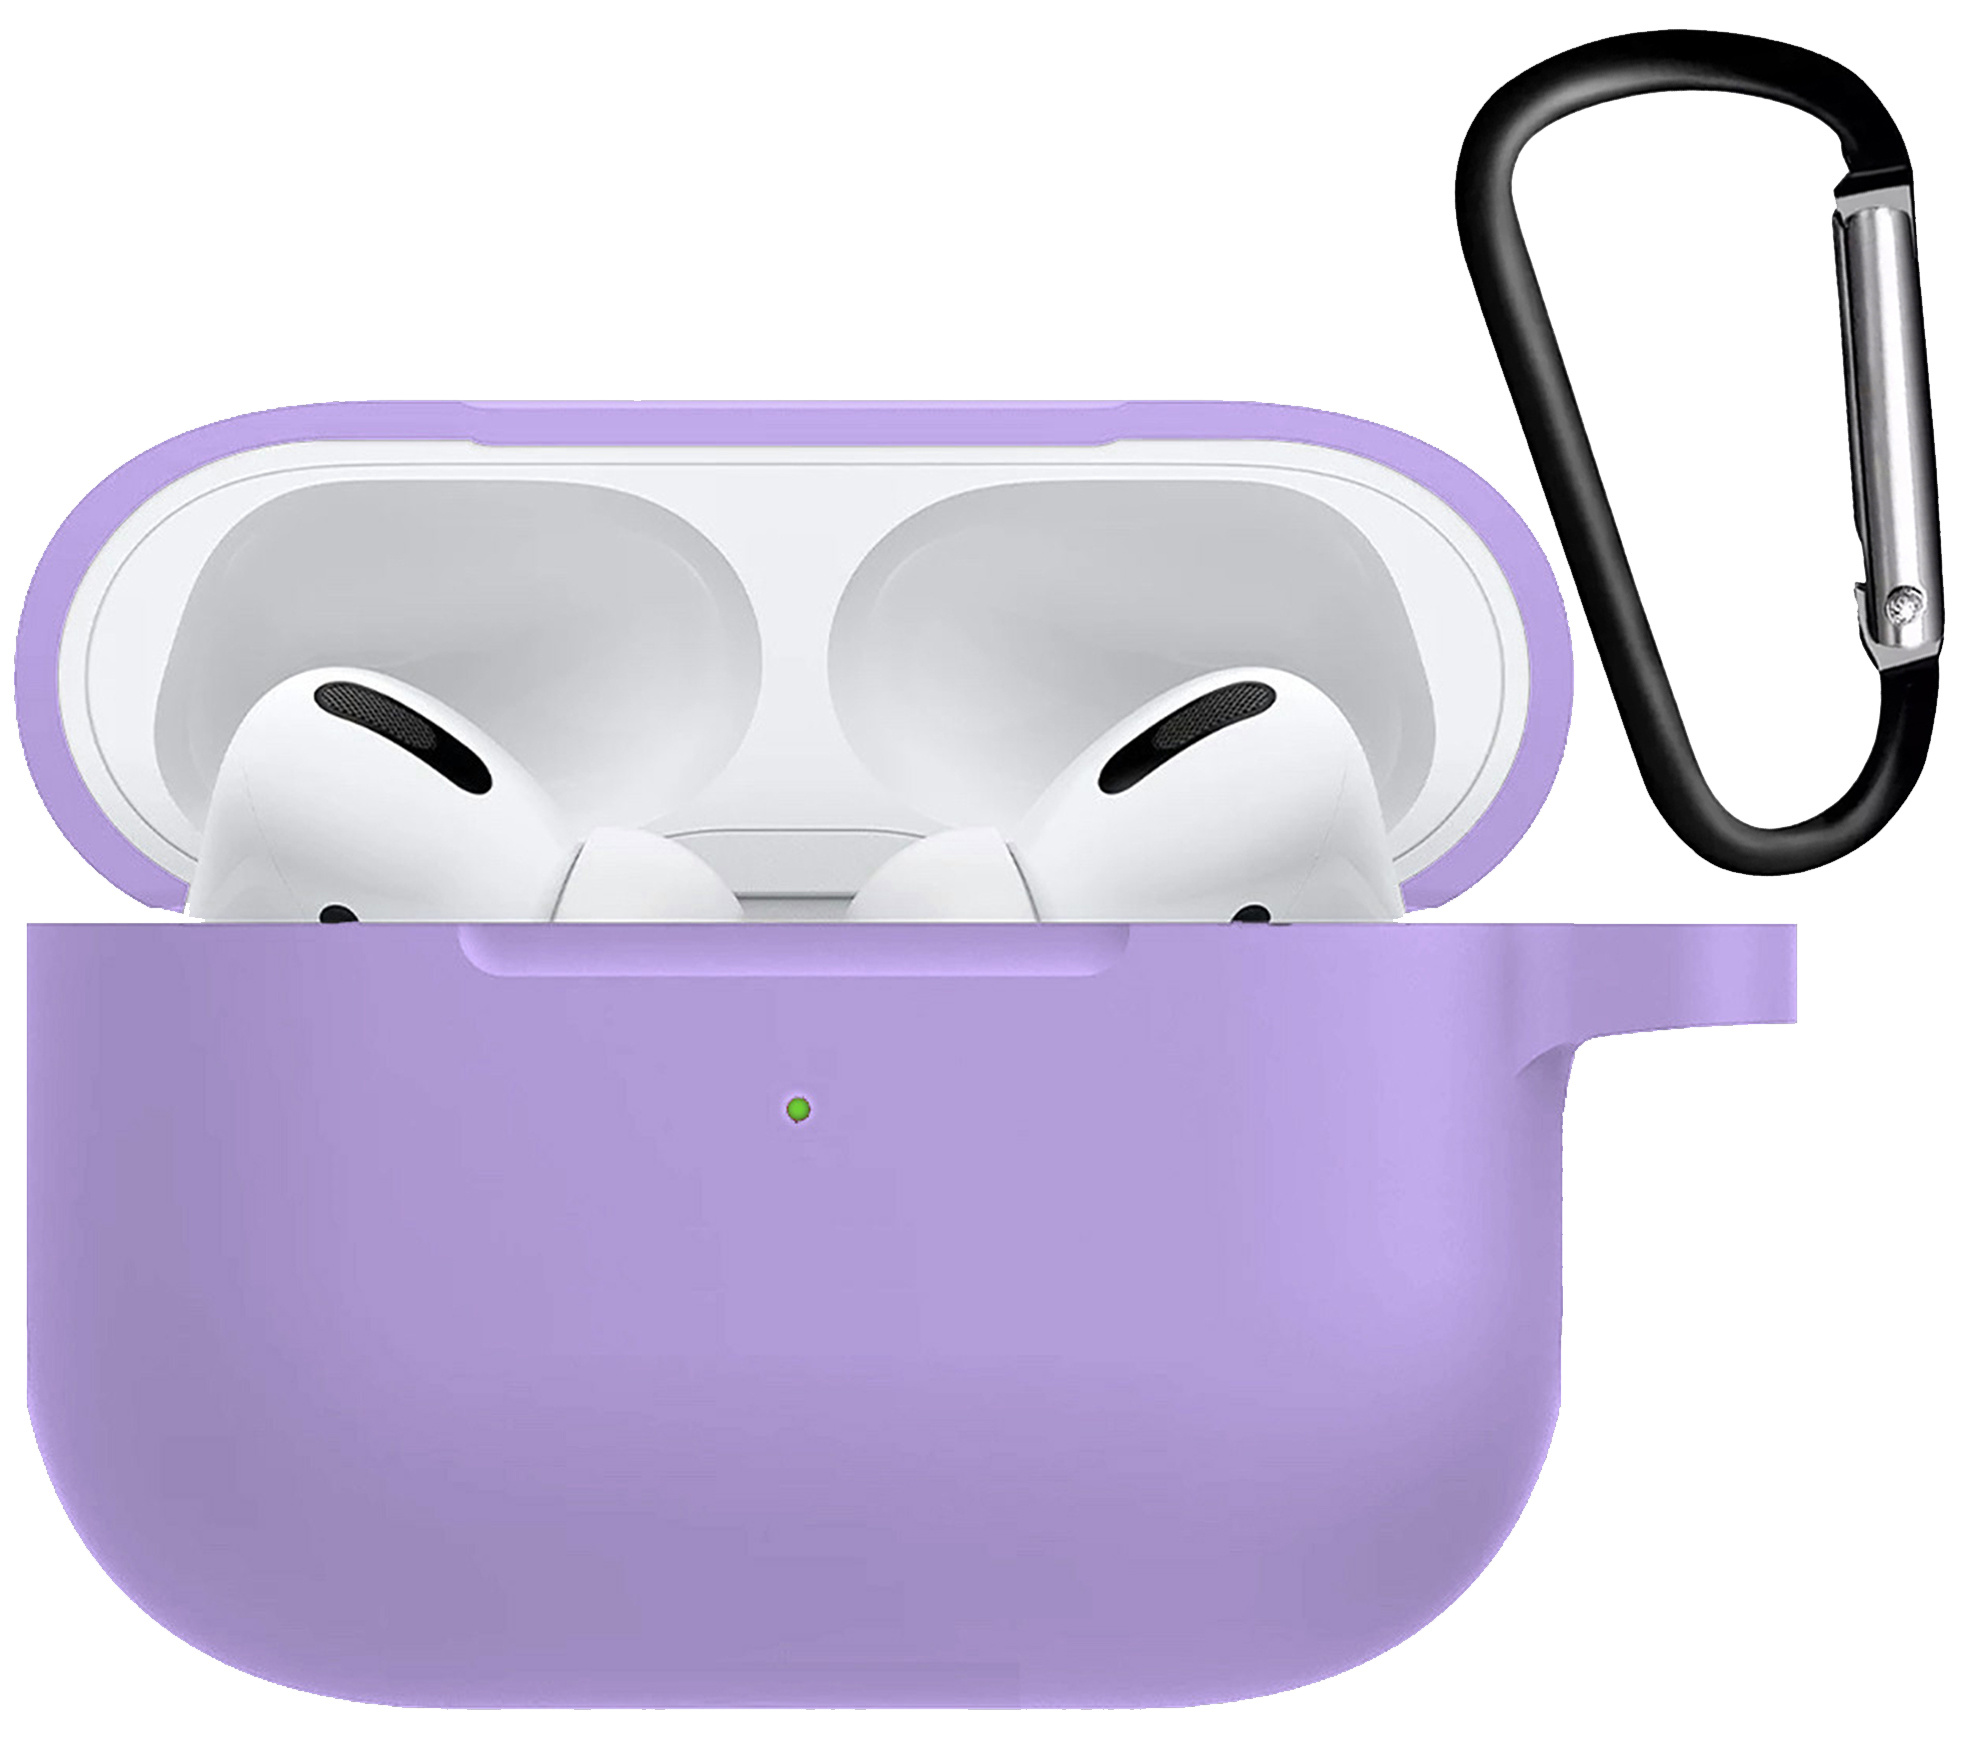 Nomfy Hoes Geschikt voor AirPods Pro Hoesje Siliconen Case - Hoesje Geschikt voor AirPods Pro Case Hoes - Lila - 2 PACK